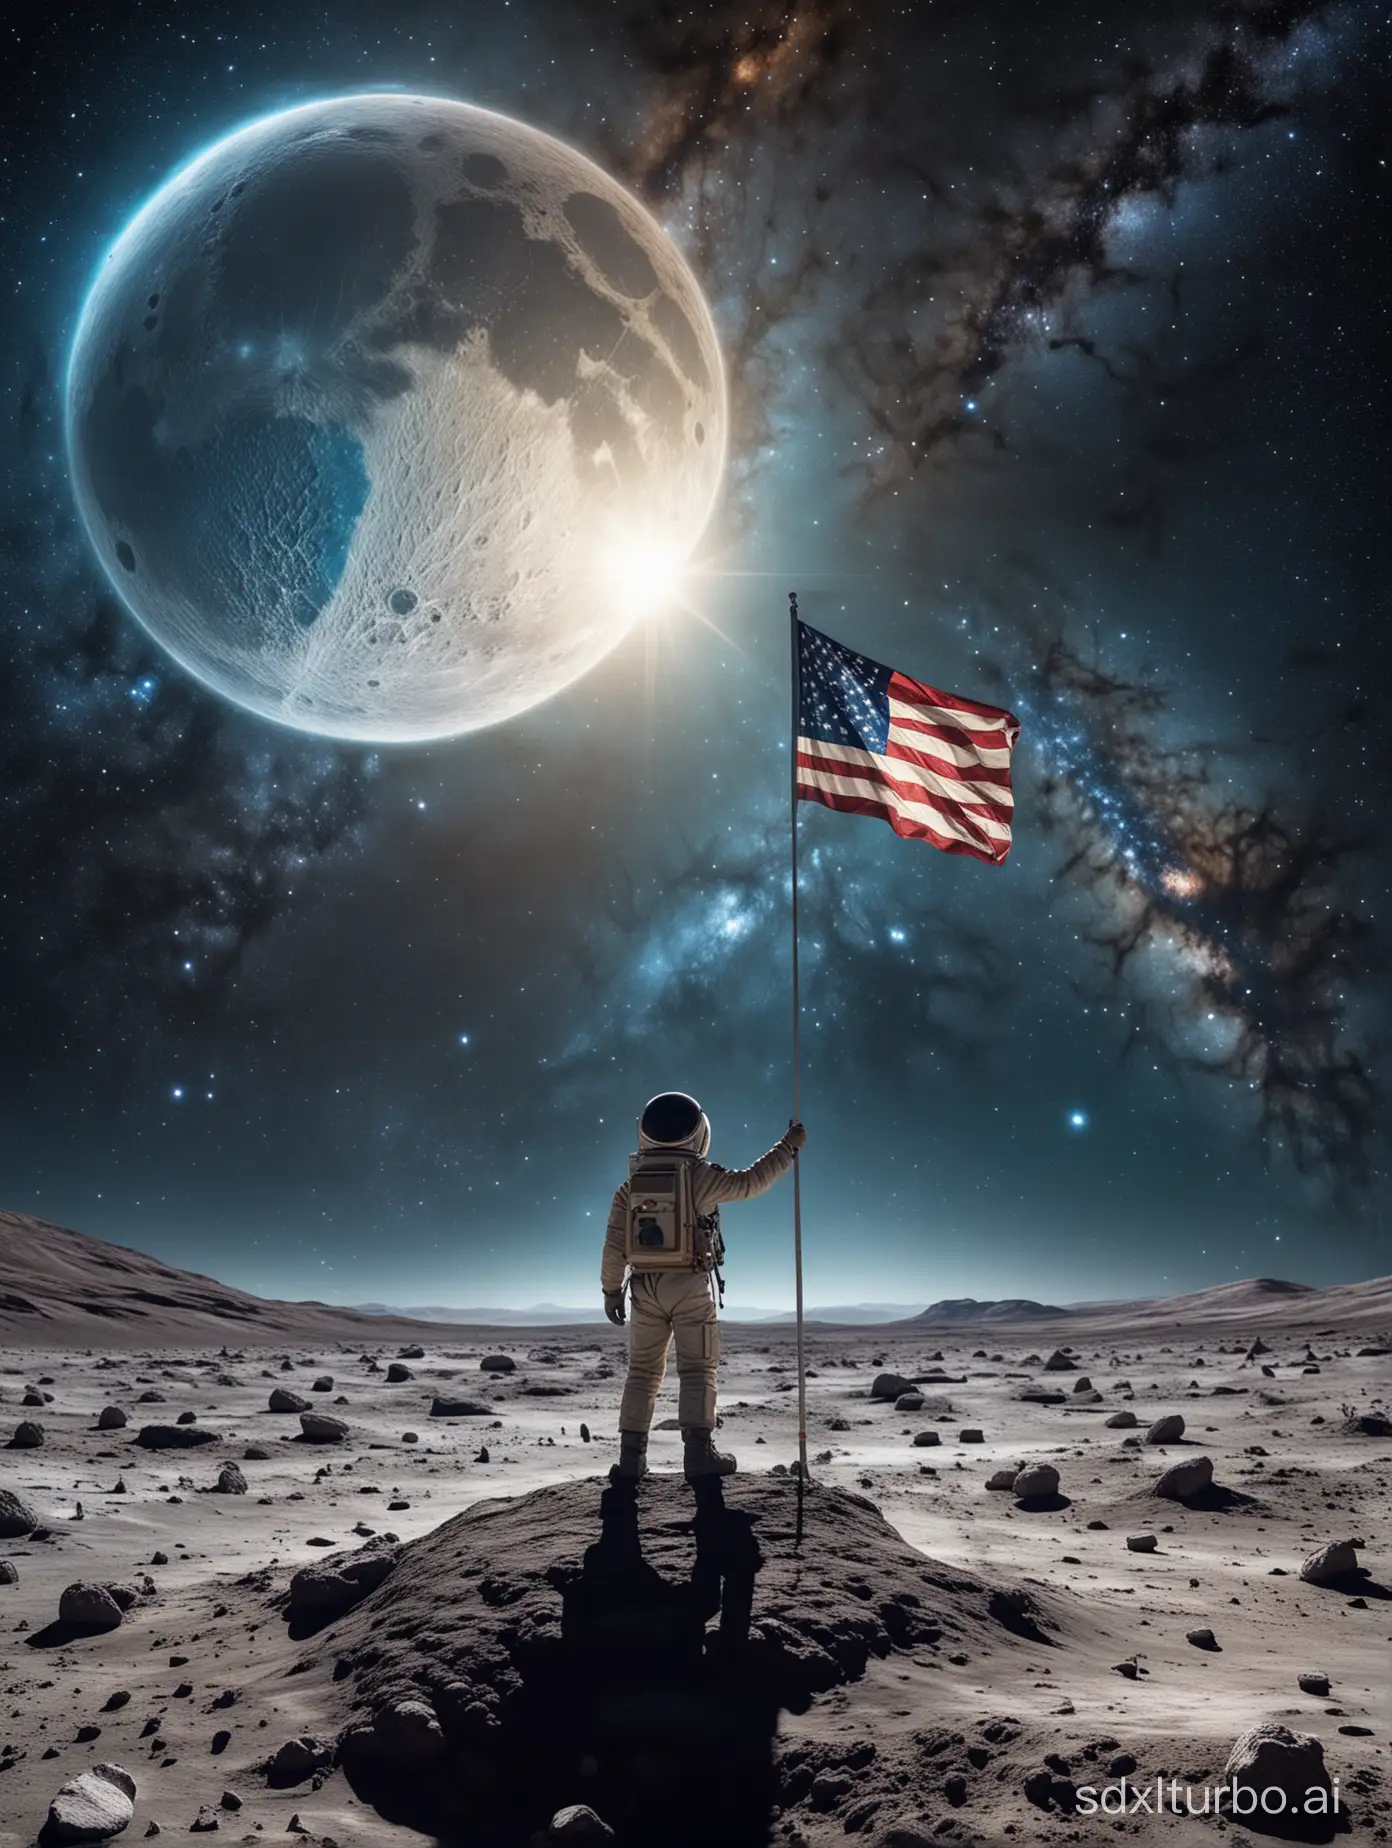 A boy, holding a national flag, stands on the surface of the moon, with a blue planet and the Milky Way galaxy behind him, vibrant colors.